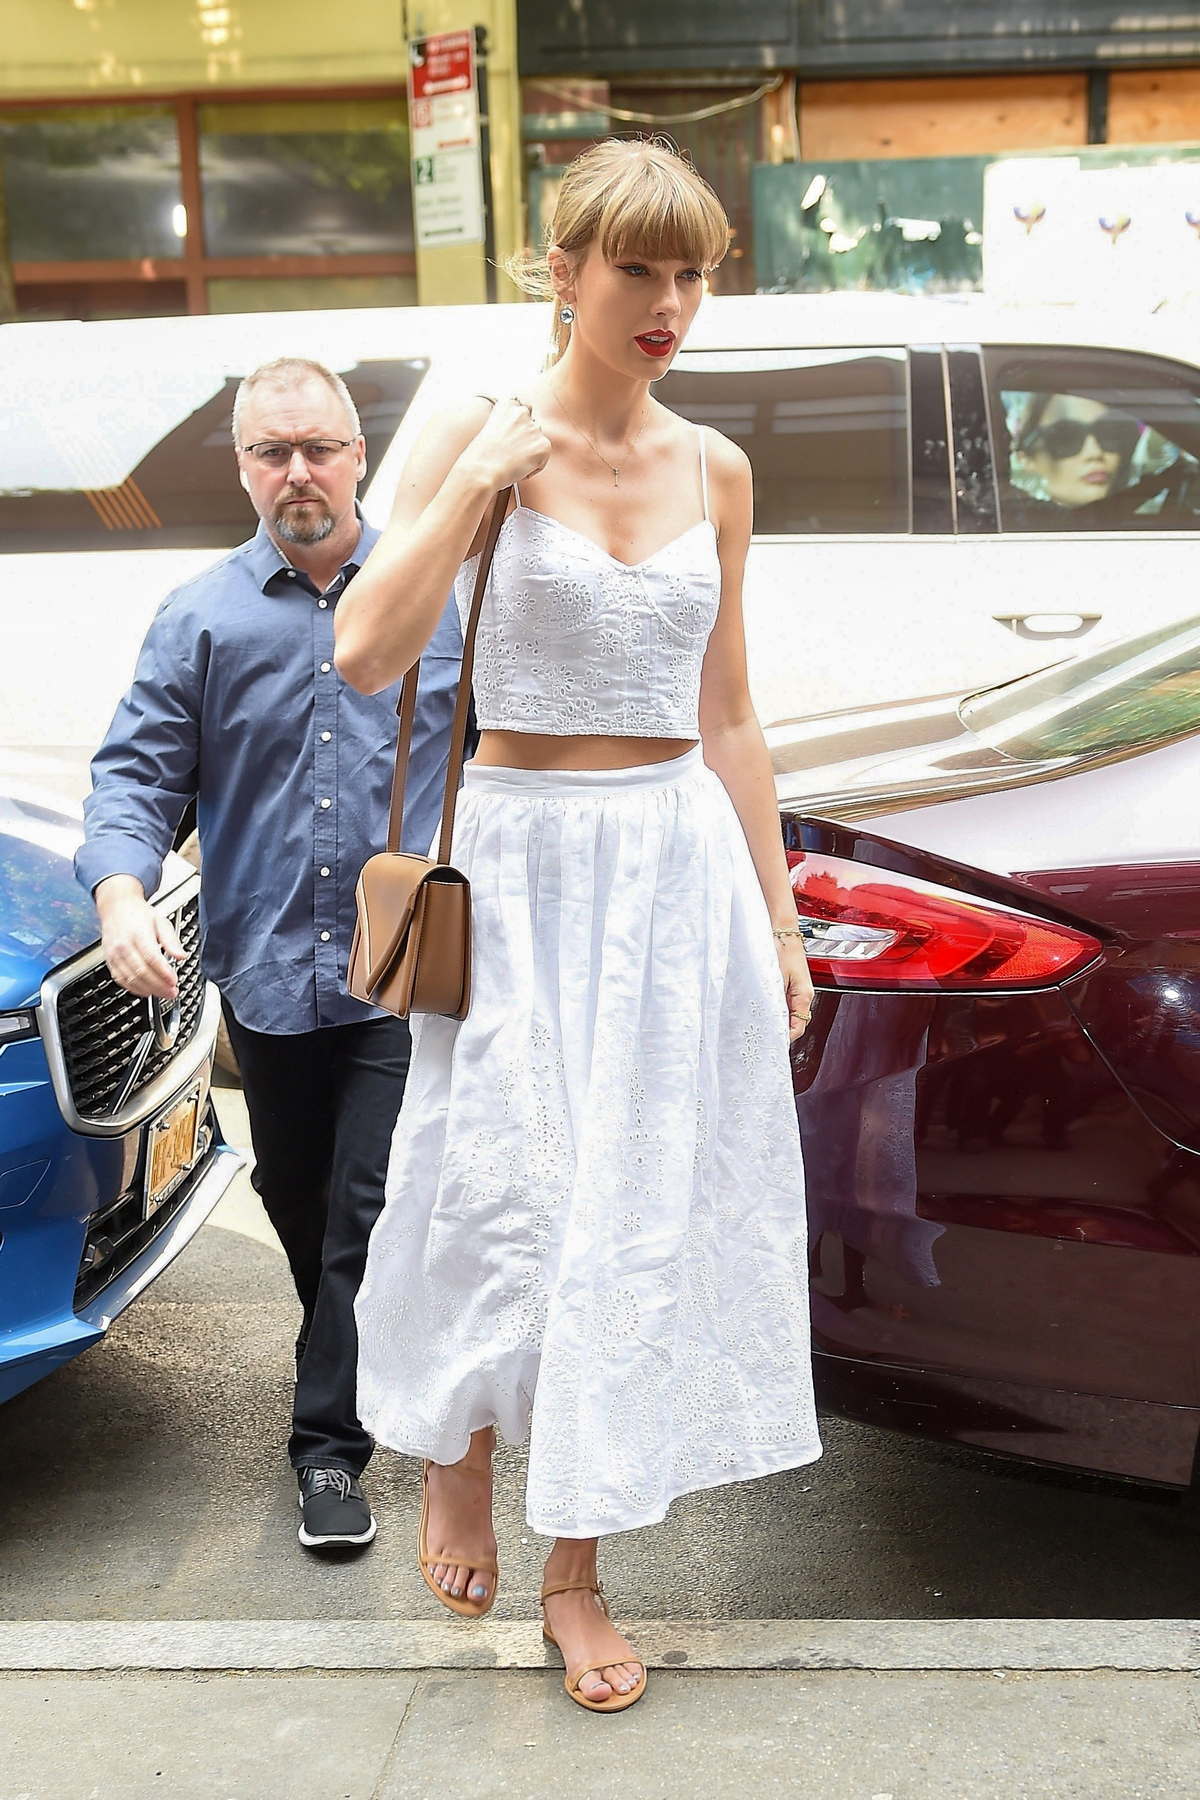 Taylor Swift looks stunning in white as she arrives at Electric Lady Studio in New York City